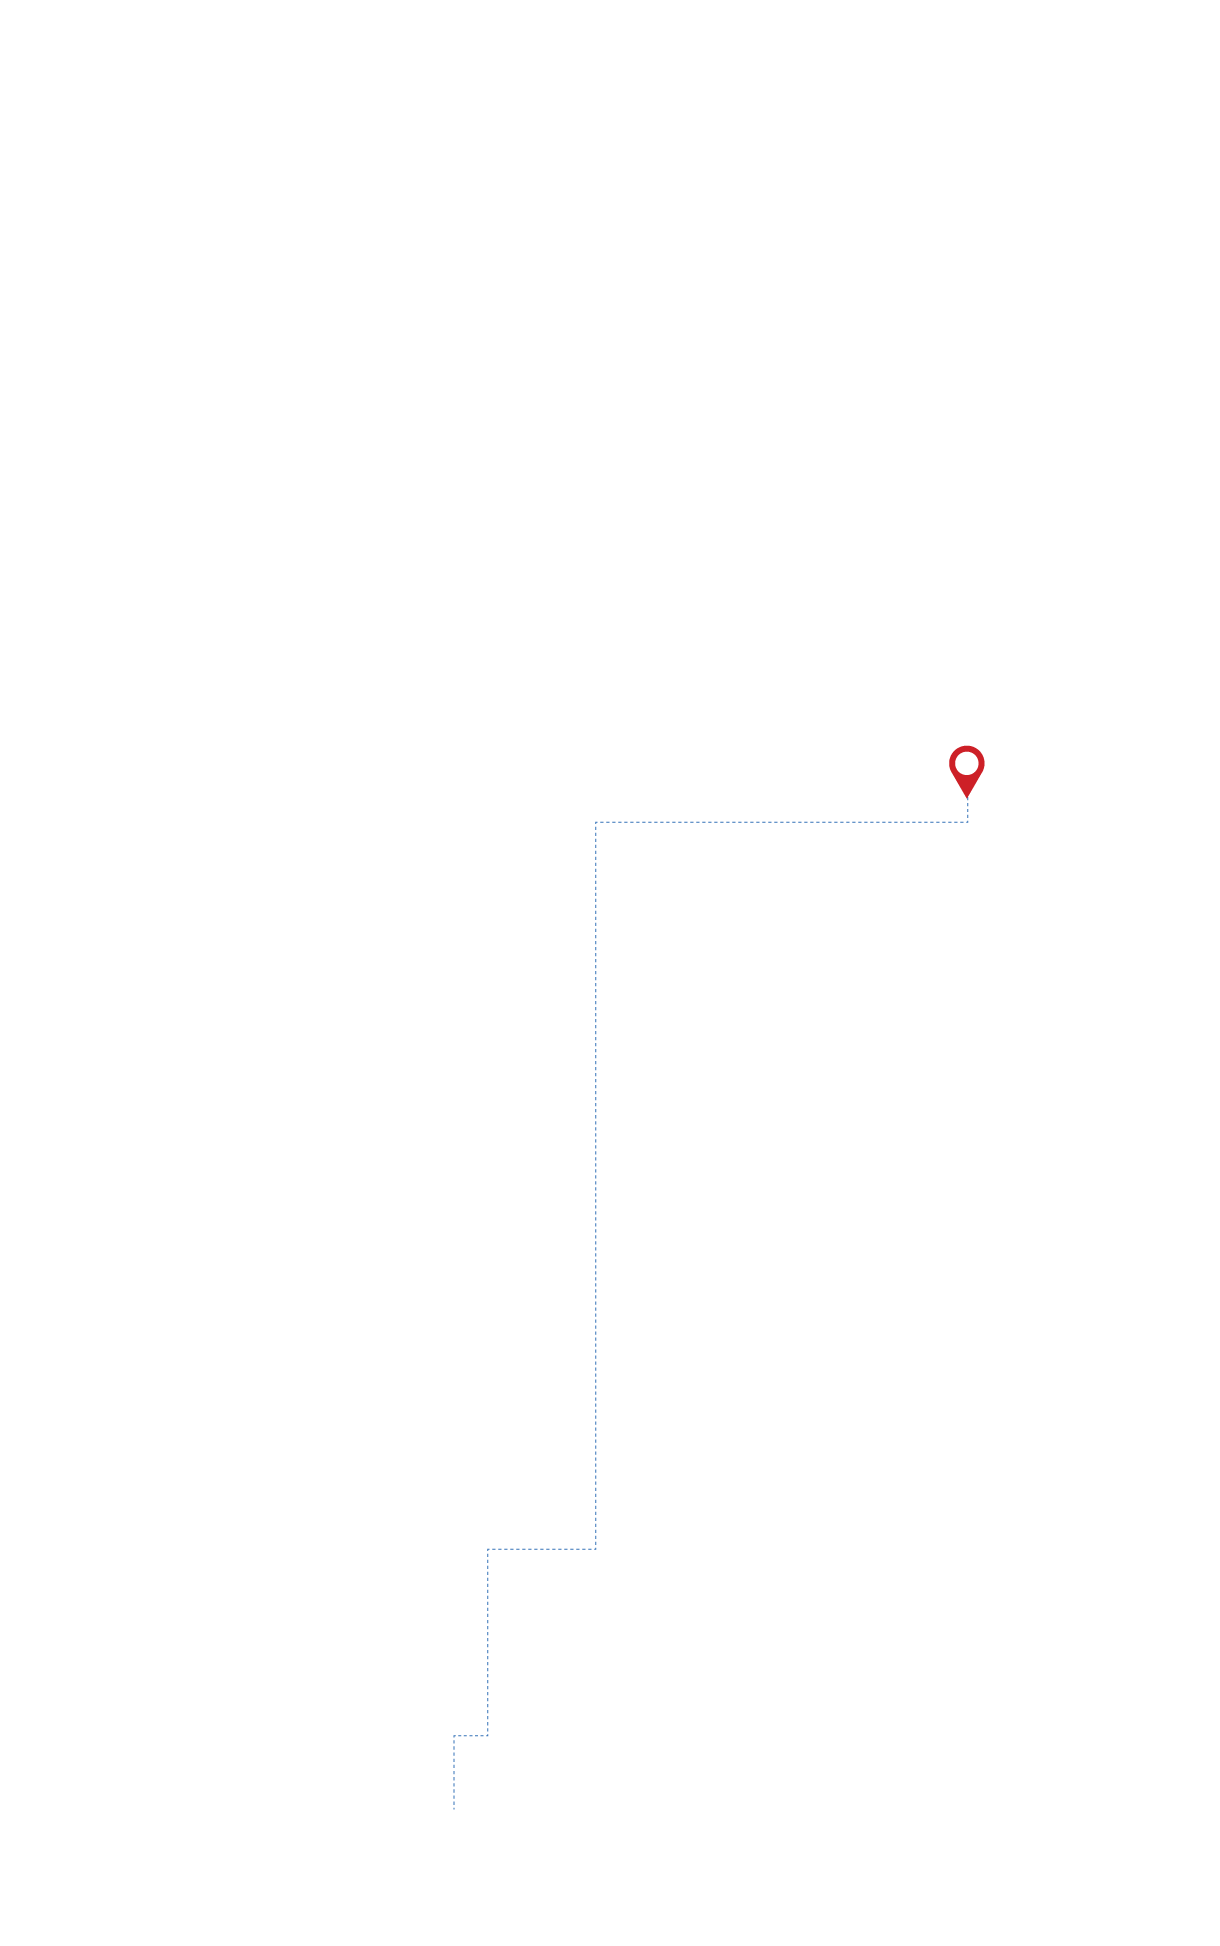 pathway image to items